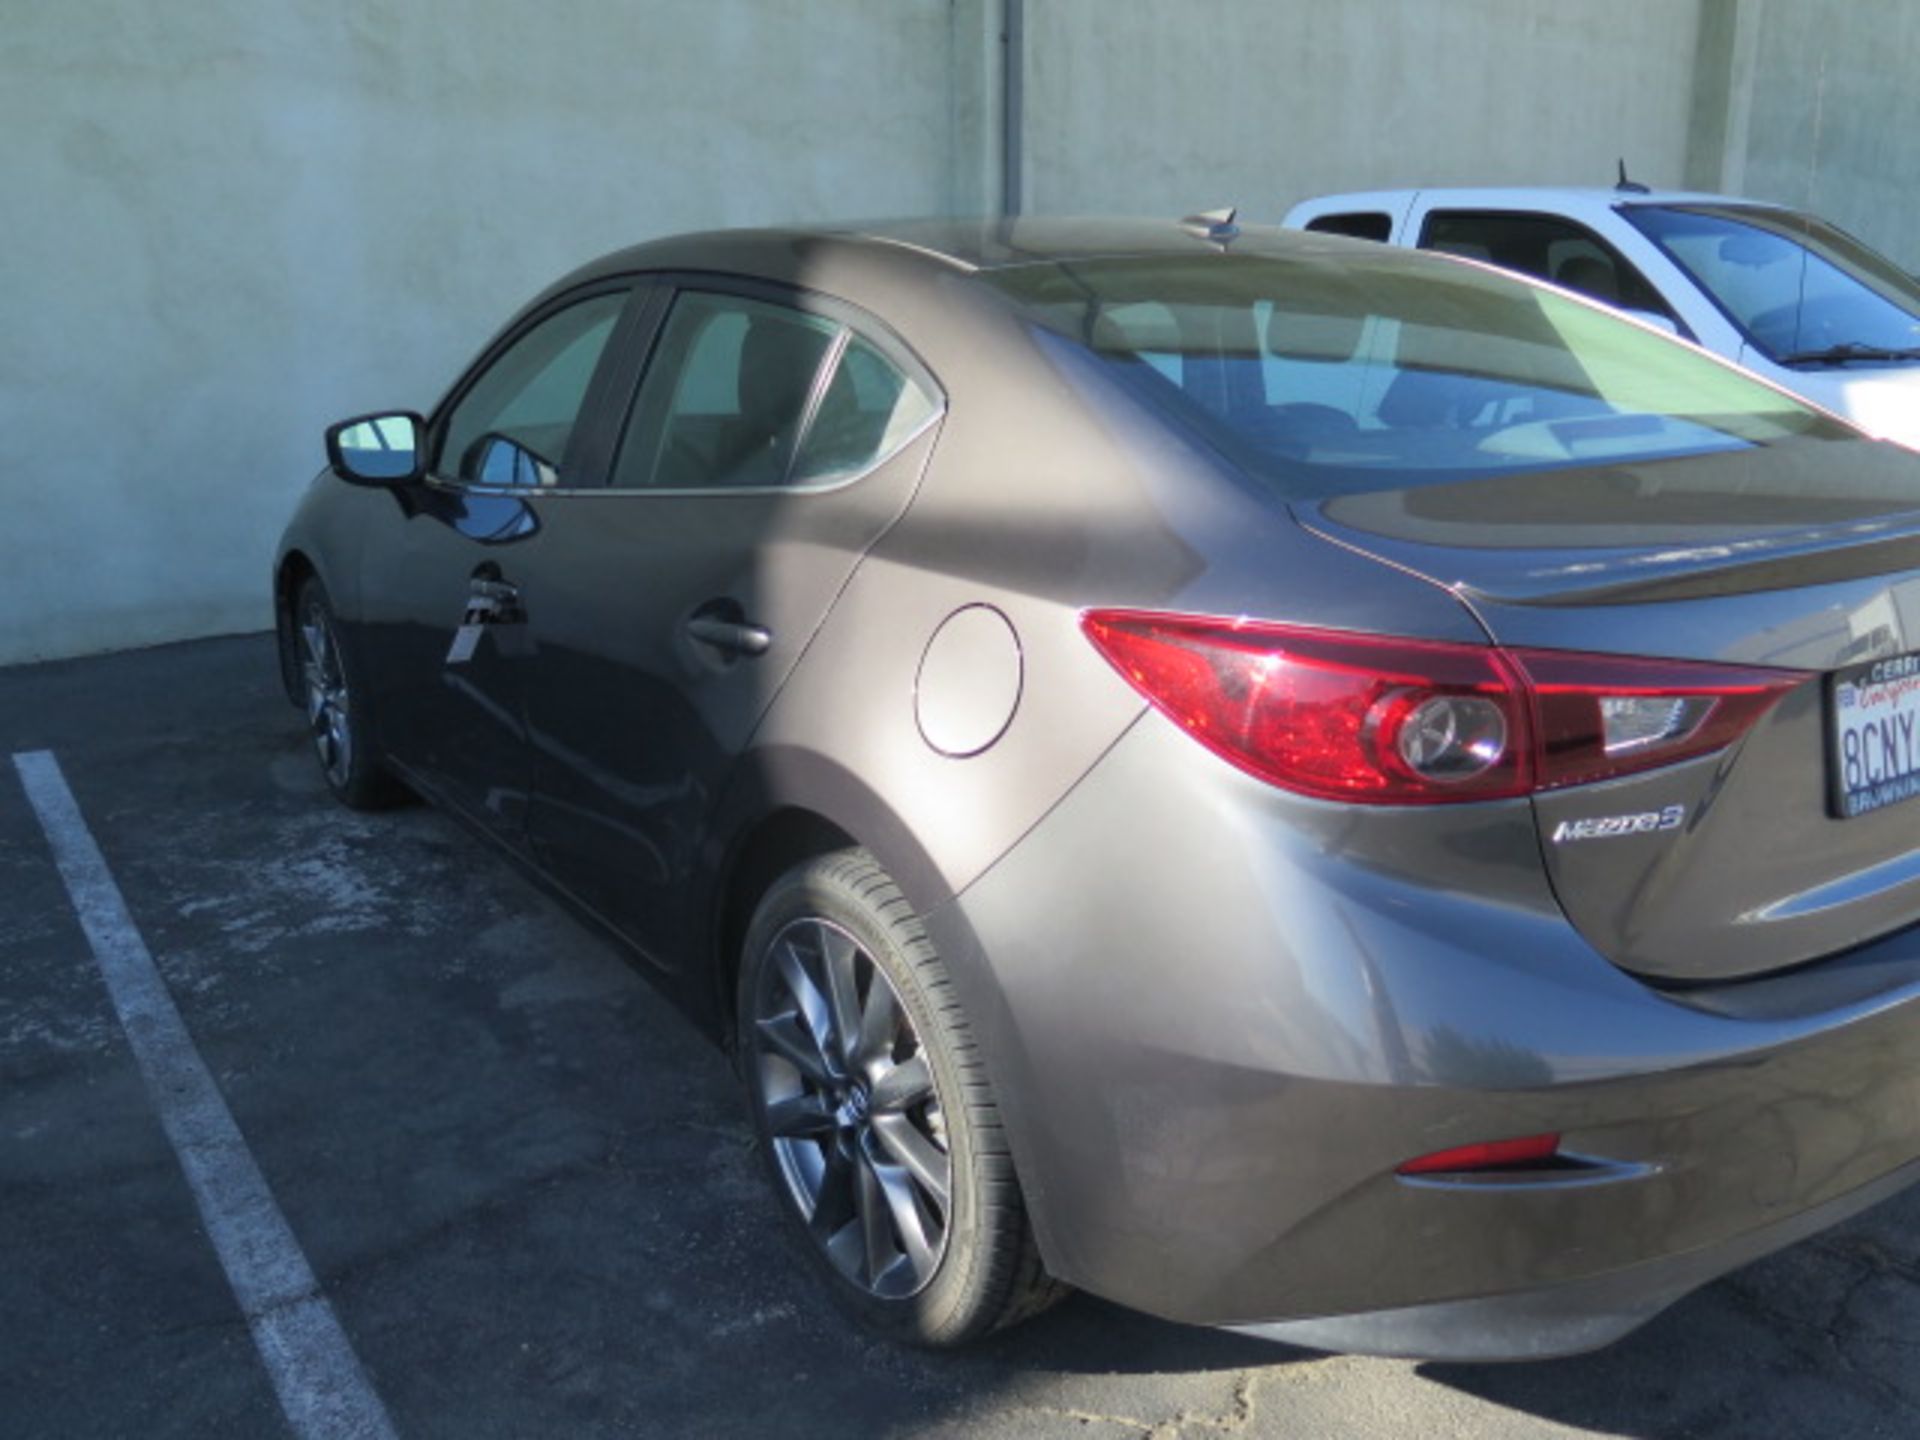 2018 Mazda 3 4-Door Sedan Lisc# 8CNY428 w/Gas Engine, Automatic Trans, Front End Damage, SOLD AS IS - Image 7 of 25